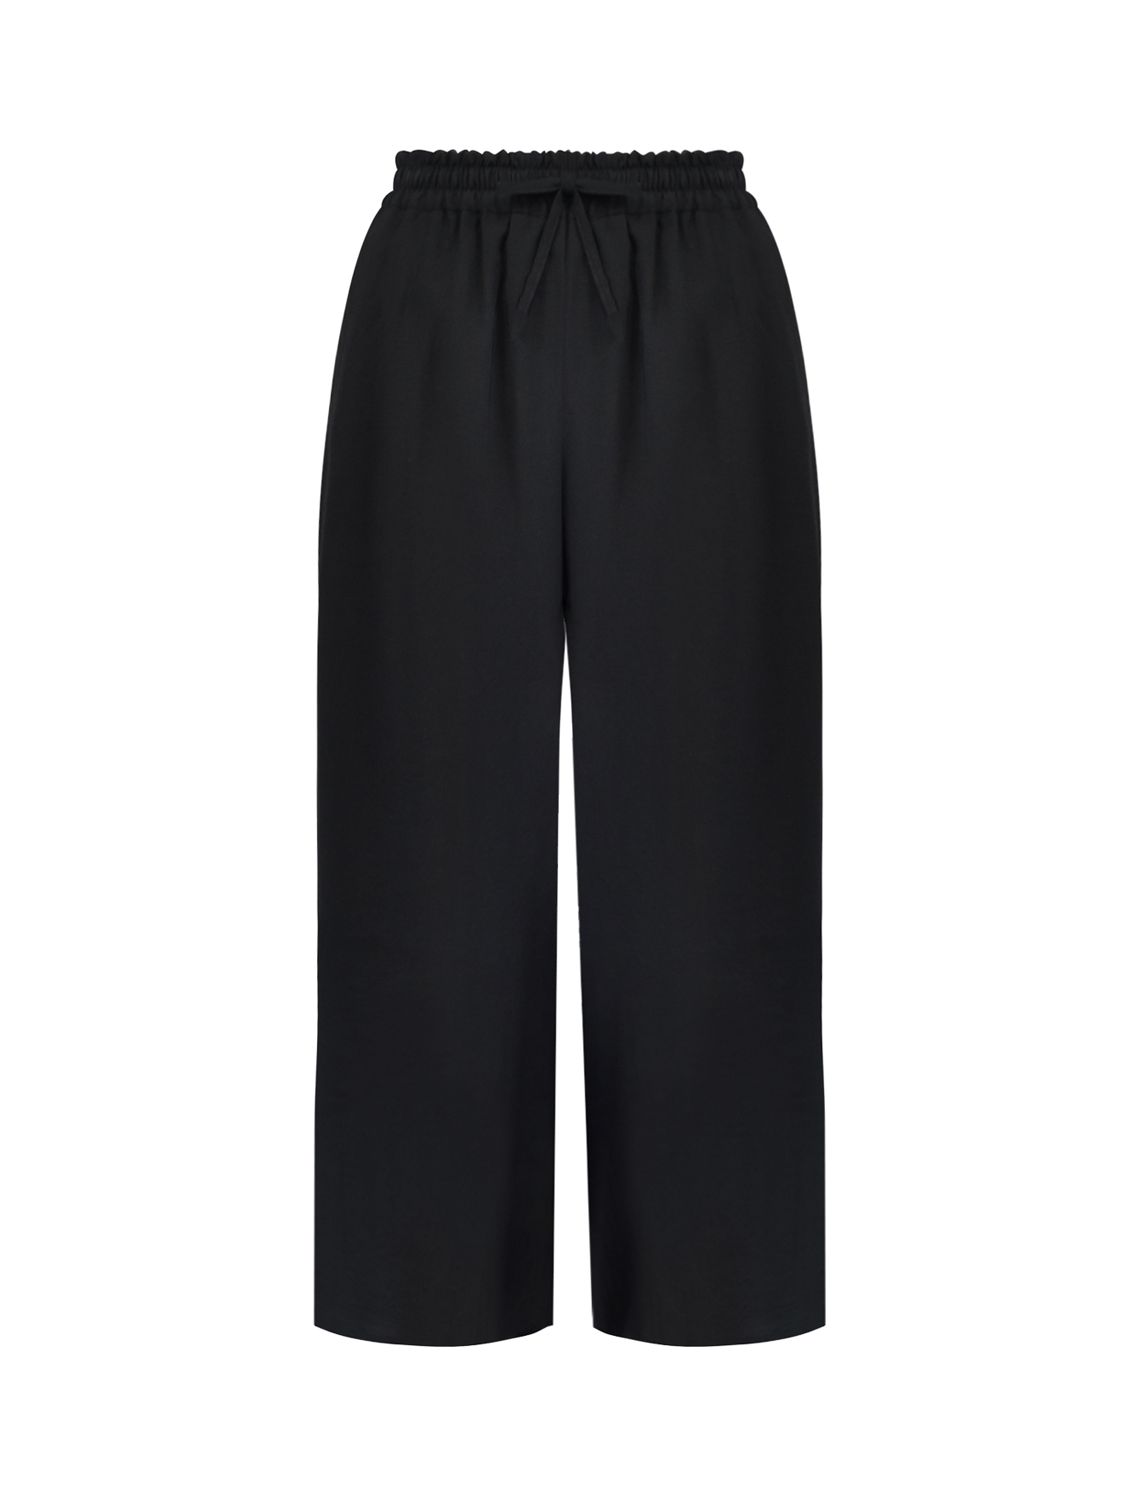 Ro&Zo Pull On Culotte Trousers, Black at John Lewis & Partners